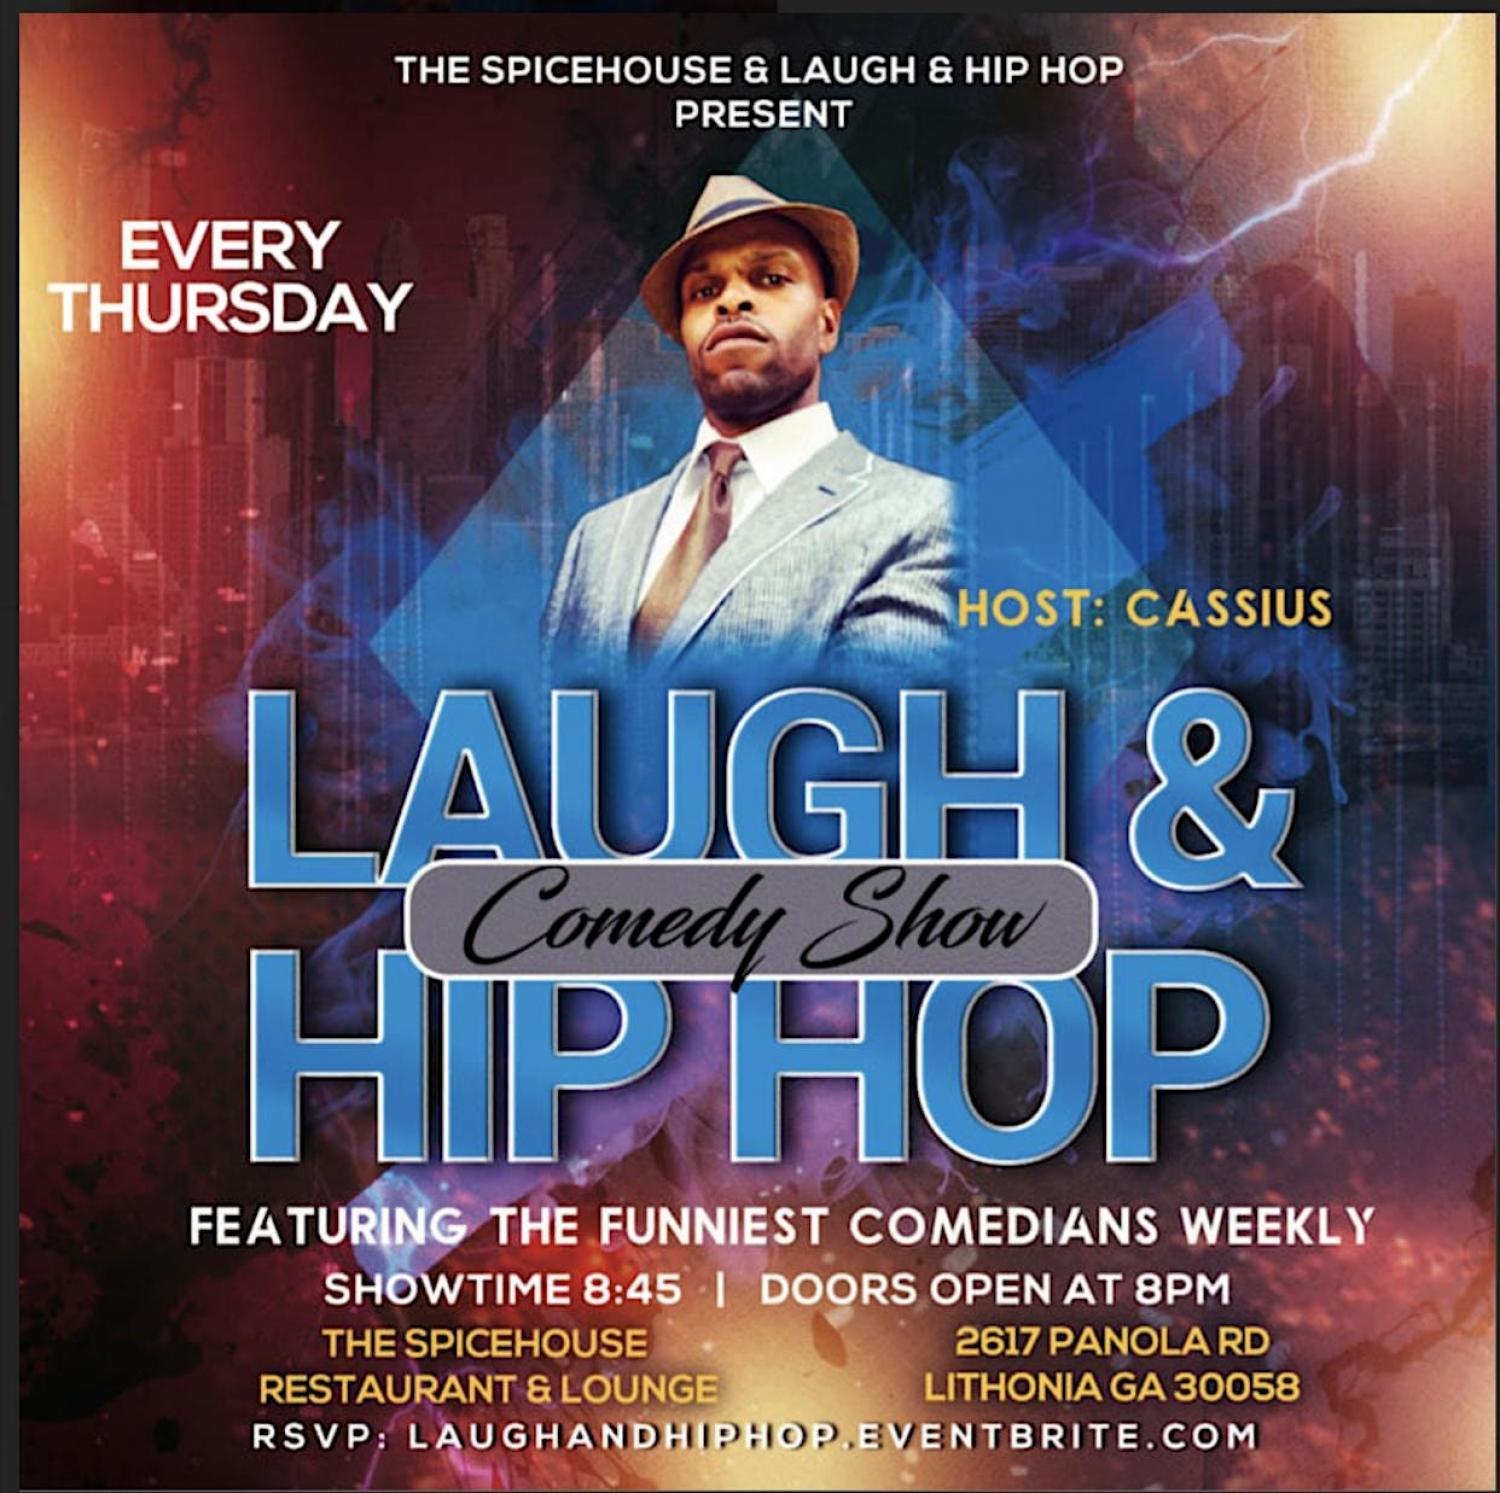 LAUGH & HIP HOP COMEDY SHOW at The Spicehouse
Thu Nov 24, 7:00 PM - Thu Nov 24, 10:00 PM
in 40 days